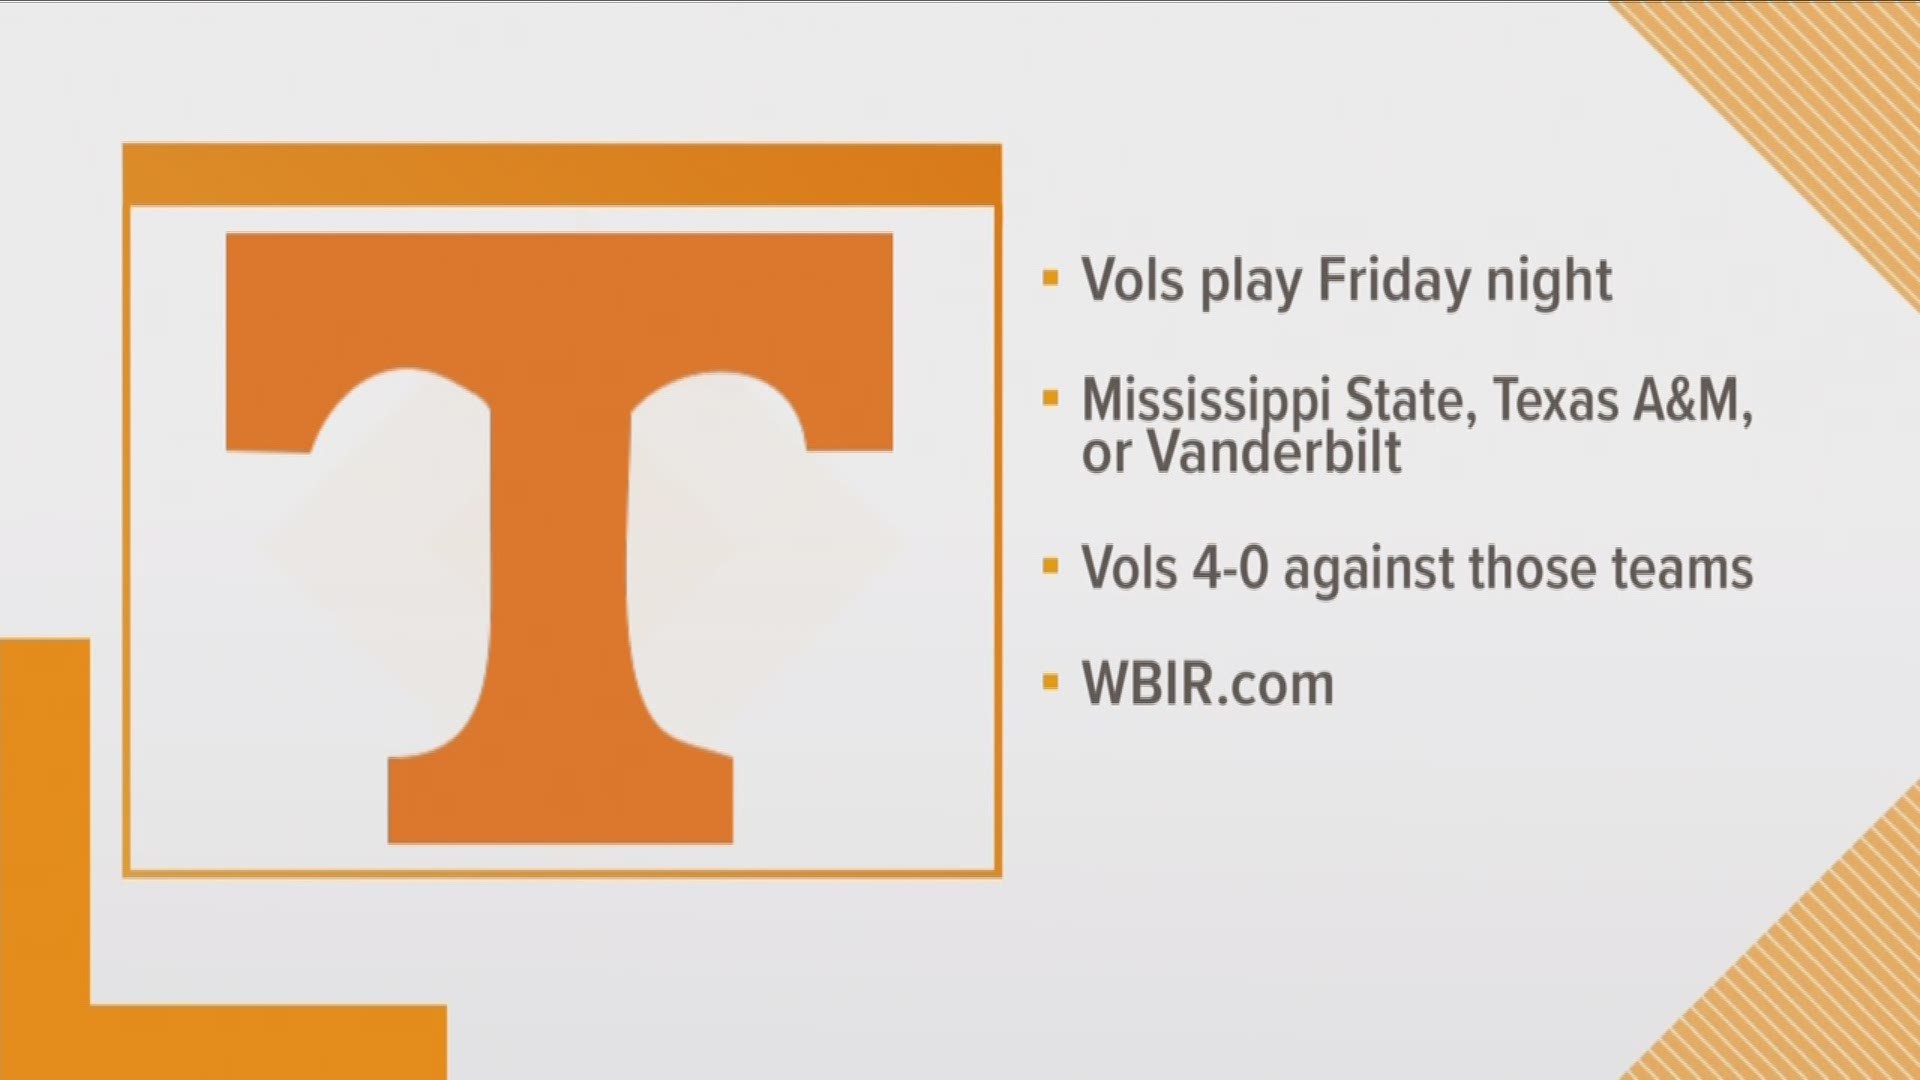 The Vols dropped to their lowest ranking at the close of the regular season.